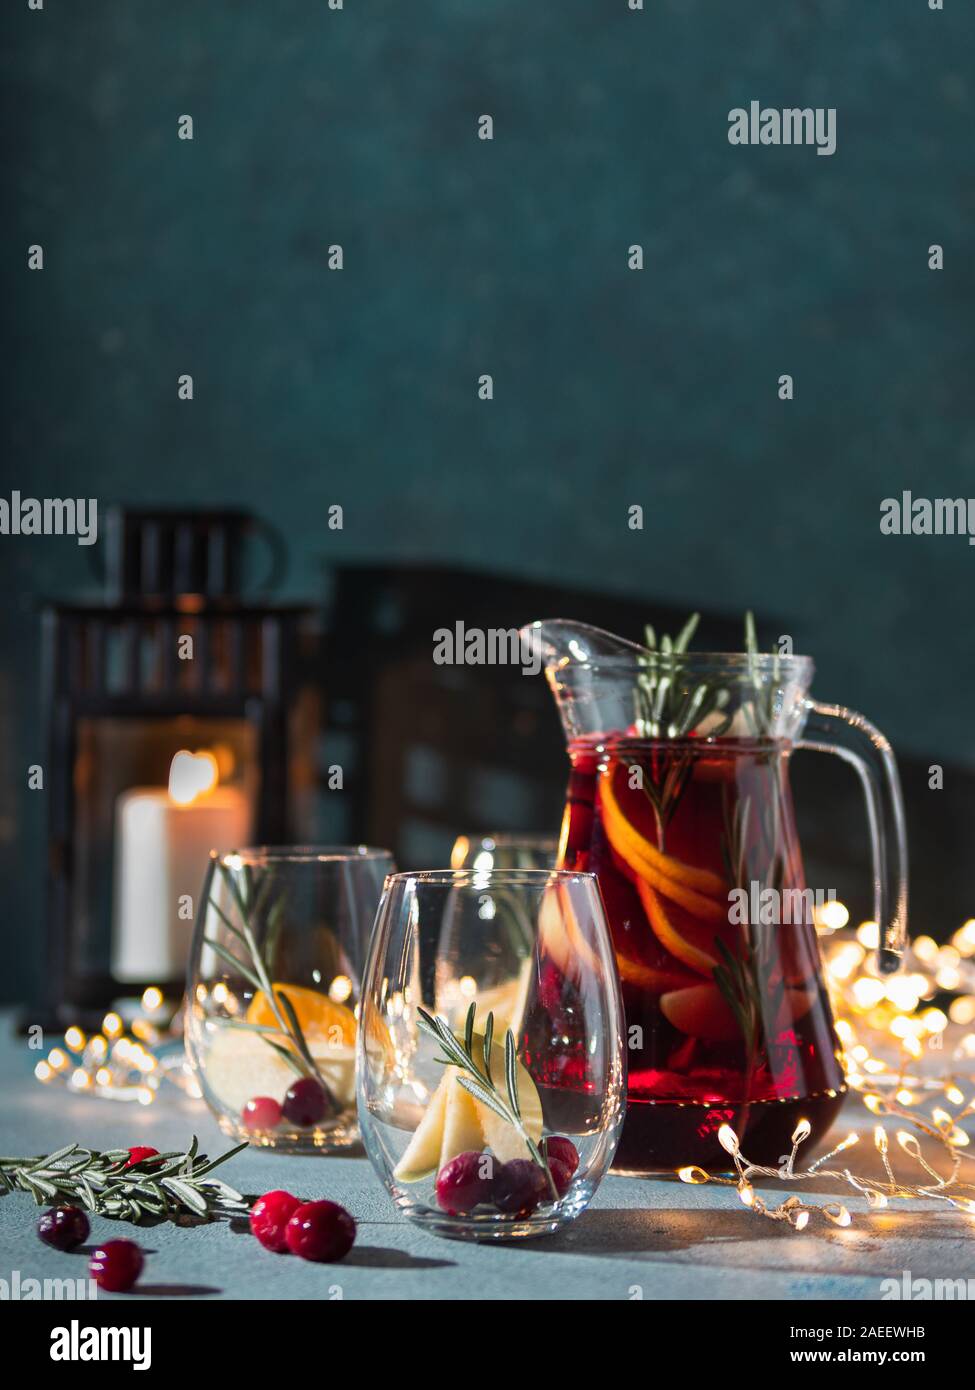 Winter sangria on dark christmas holiday background. Jugful of sangria and glasses with fruit slice, cranberry and rosemary. Copy space for text or design. Vertical. Stock Photo